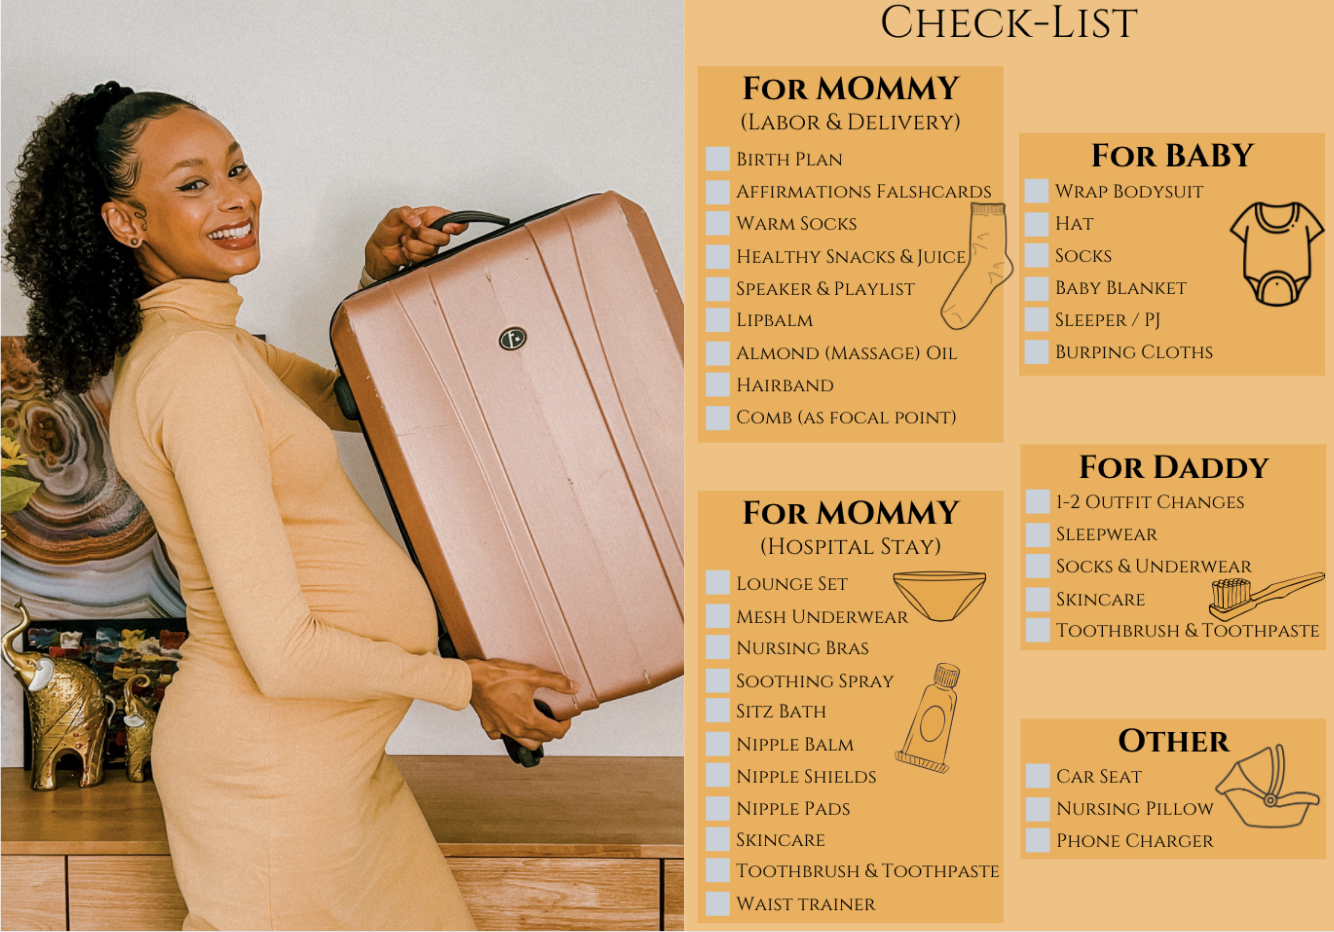 Maternity Hospital Bag Checklist: What To Pack For Mom & Baby For